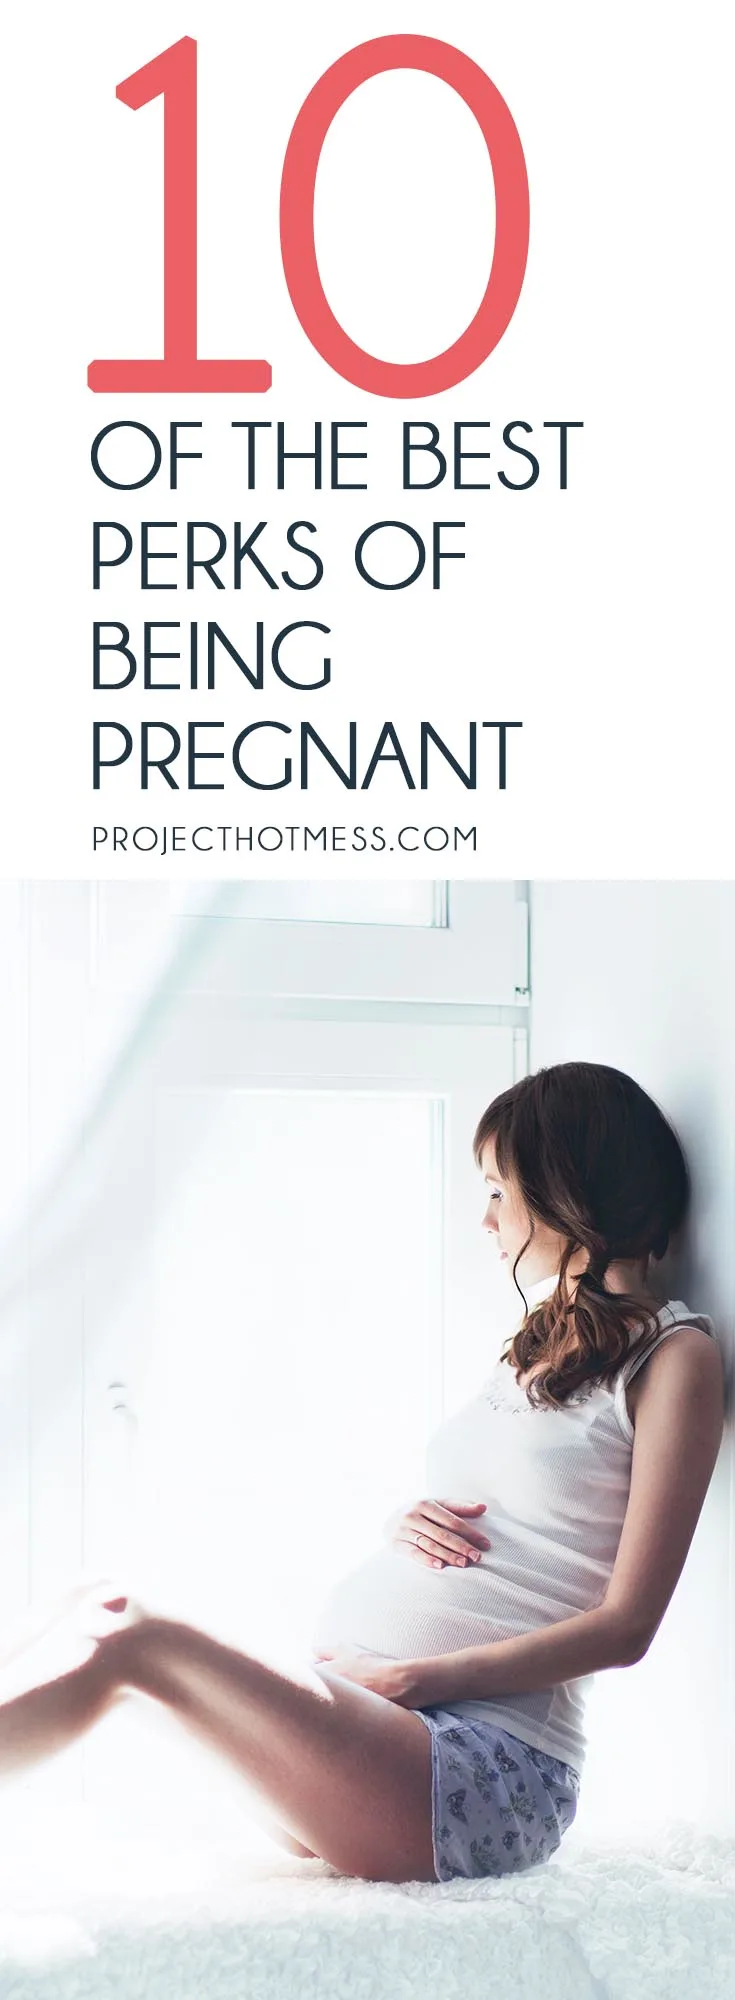 While there are some women who don't like being pregnant (myself included) there are definitely some awesome perks of being pregnant that even I can love. These are some of the best (everyone will love #6). Pregnancy | Pregnant | Pregnant Woman | First Pregnancy | New Mom | Family | New Family | Being Pregnant